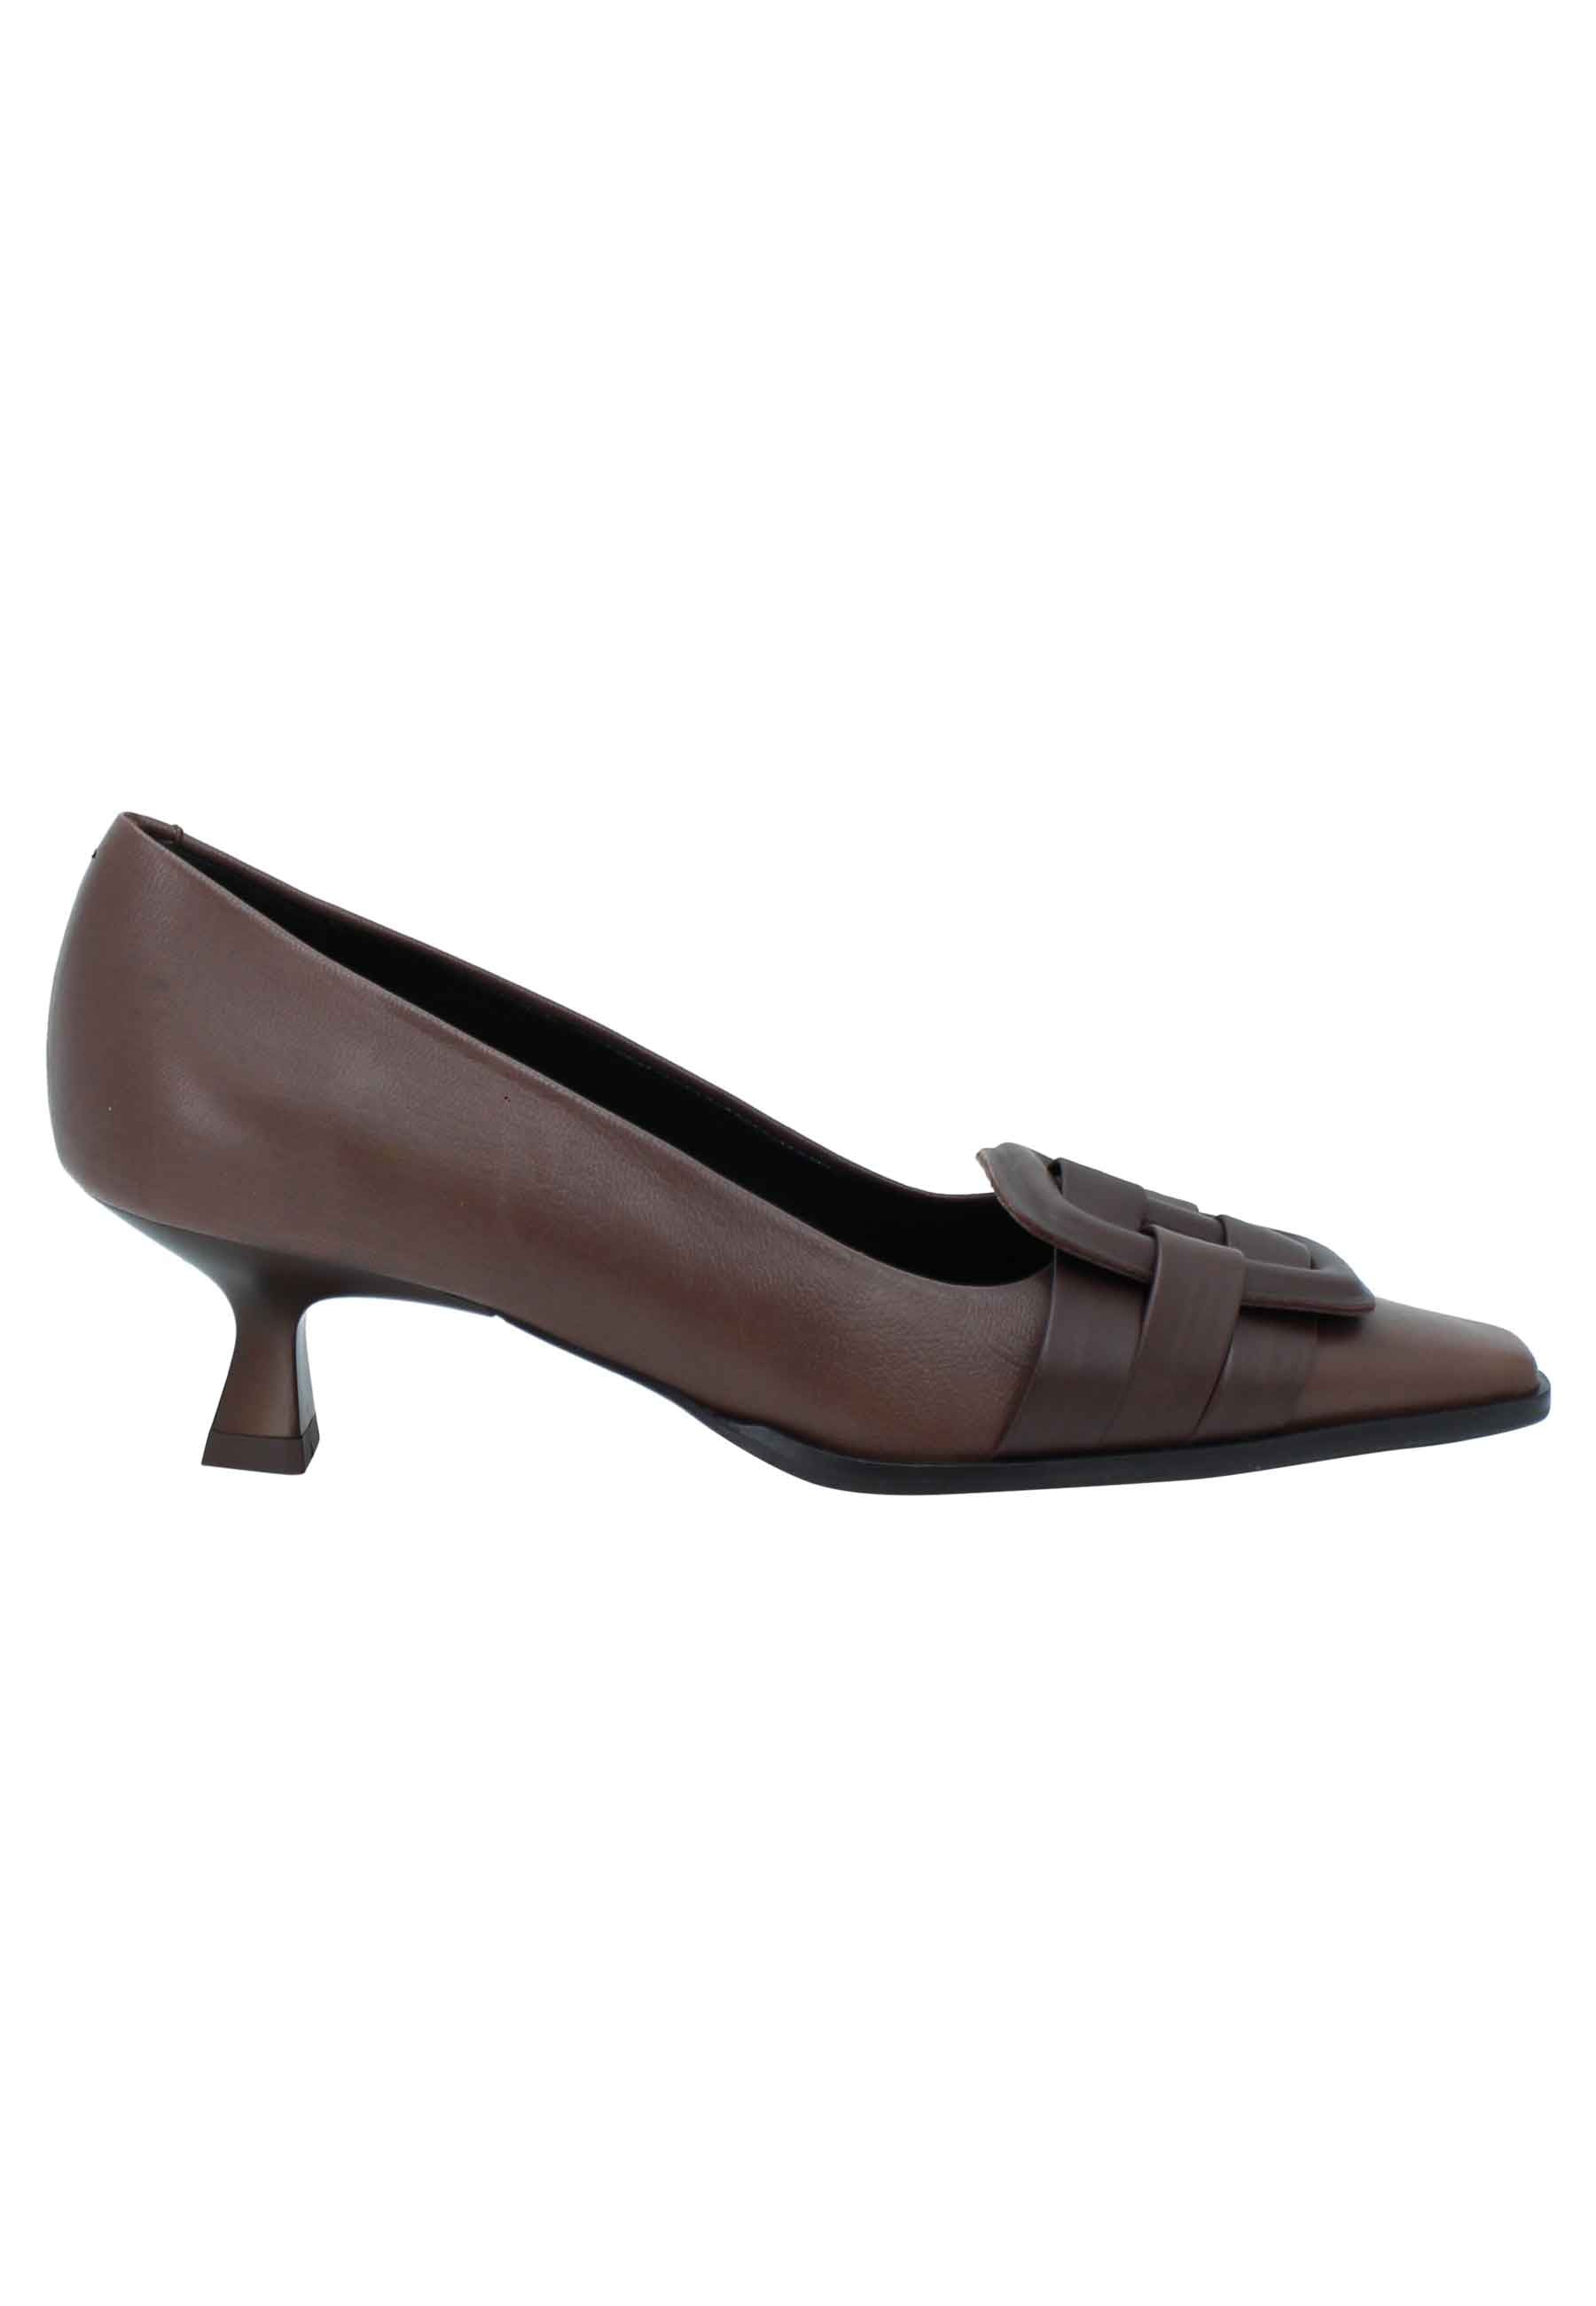 Women's low heel brown leather pumps with accessory